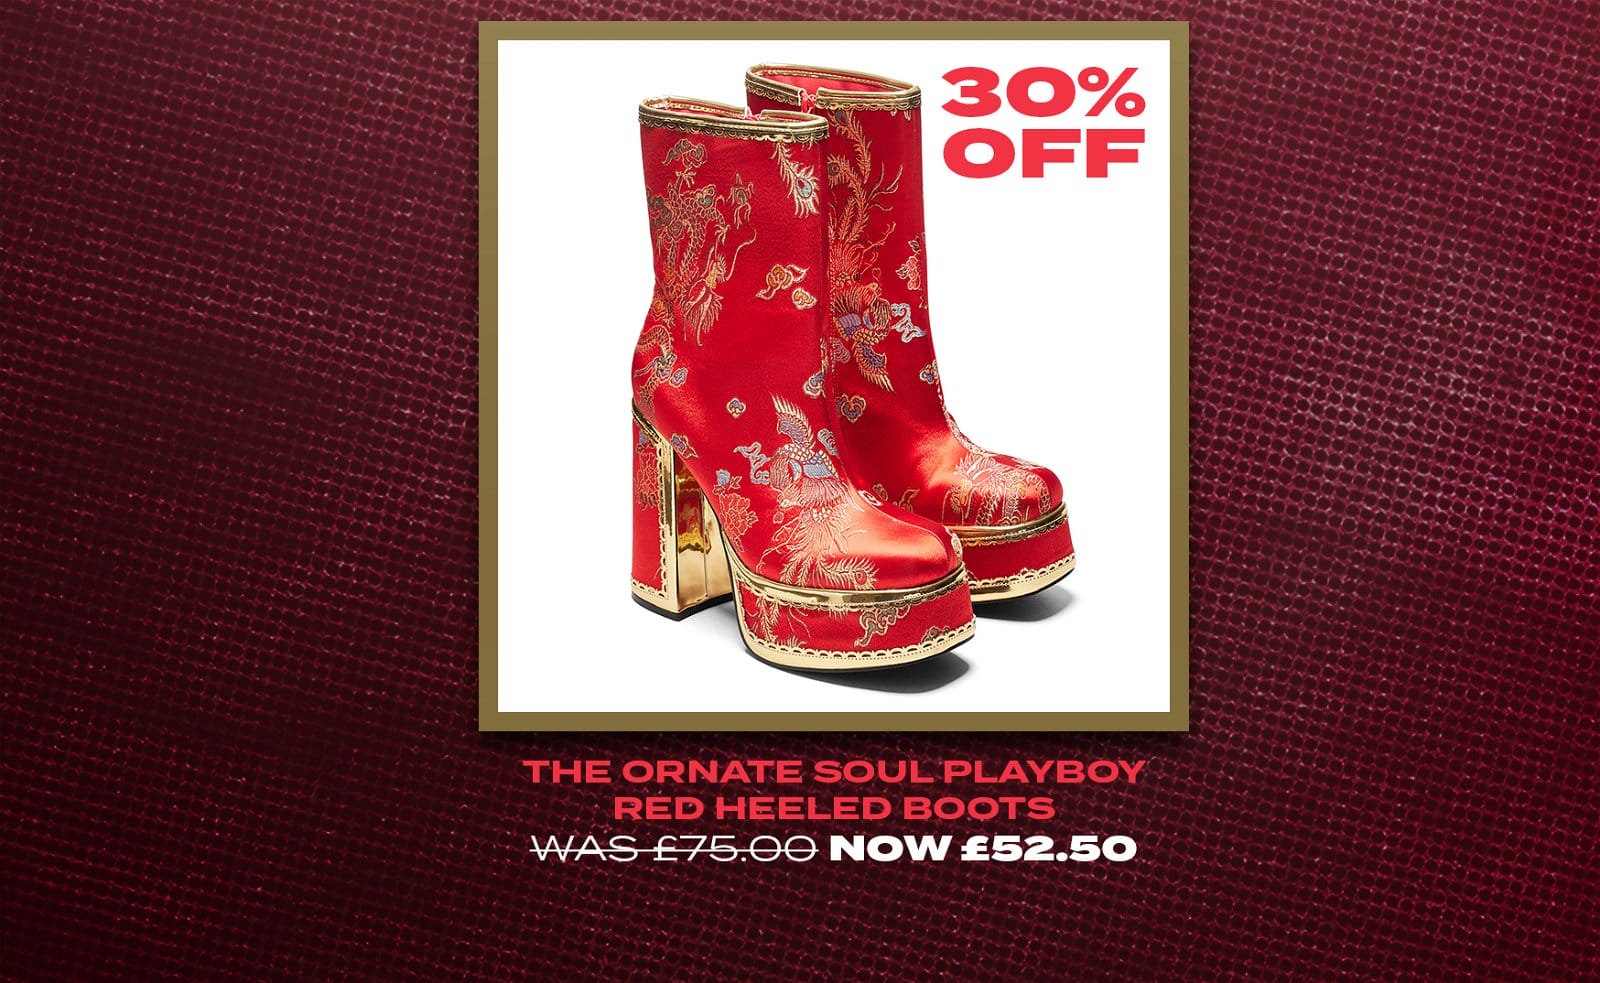 The Ornate Soul Playboy Red Heeled Boots